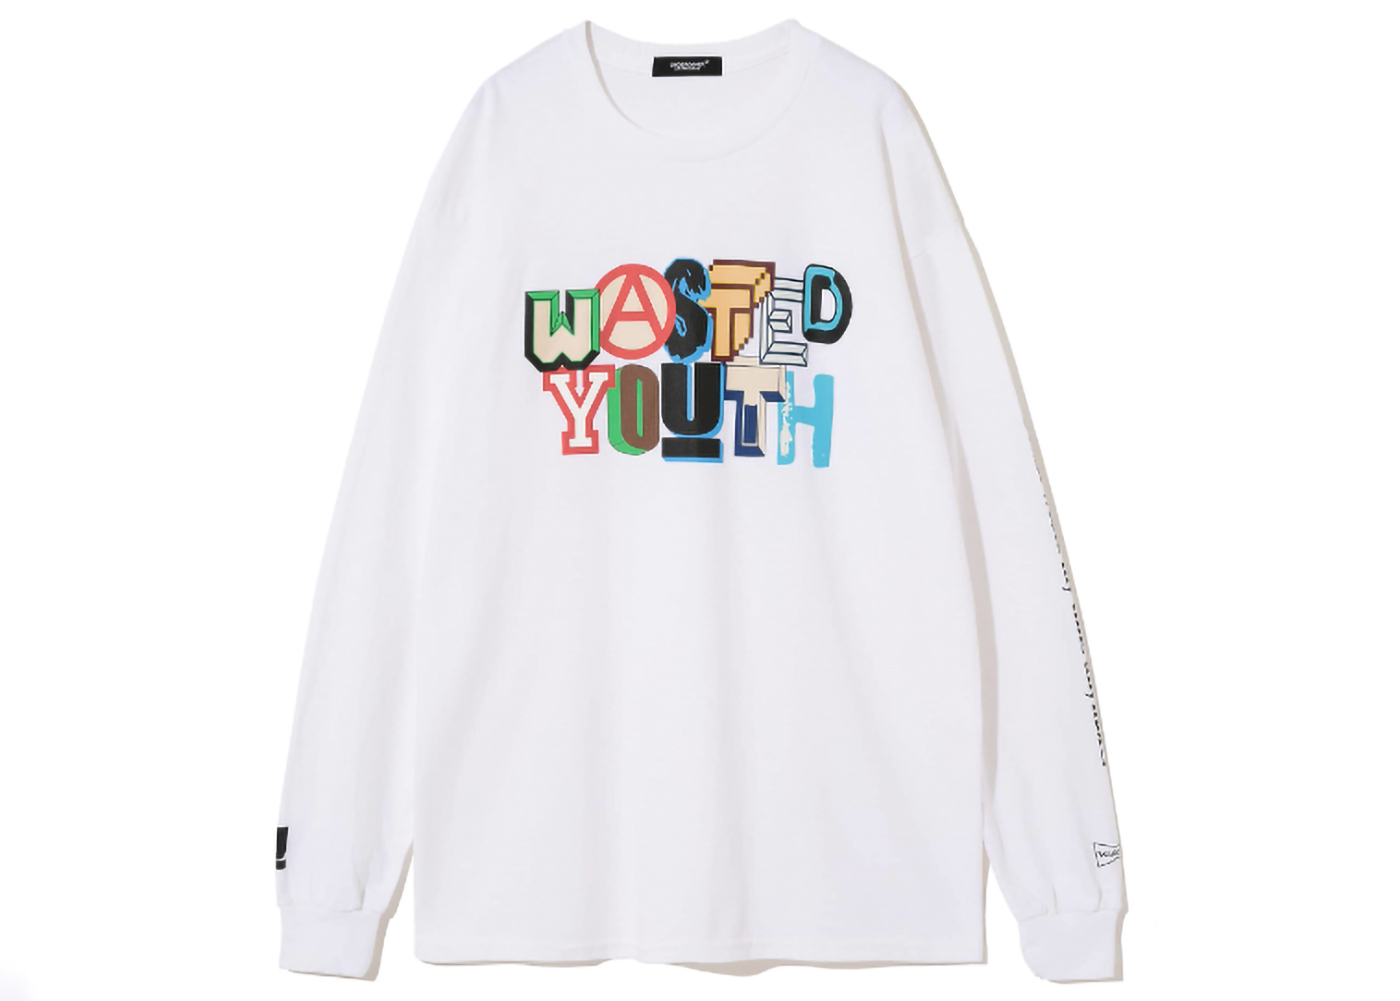 Undercover x Verdy Wasted Youth L/S T-Shirt White - SS23 - US